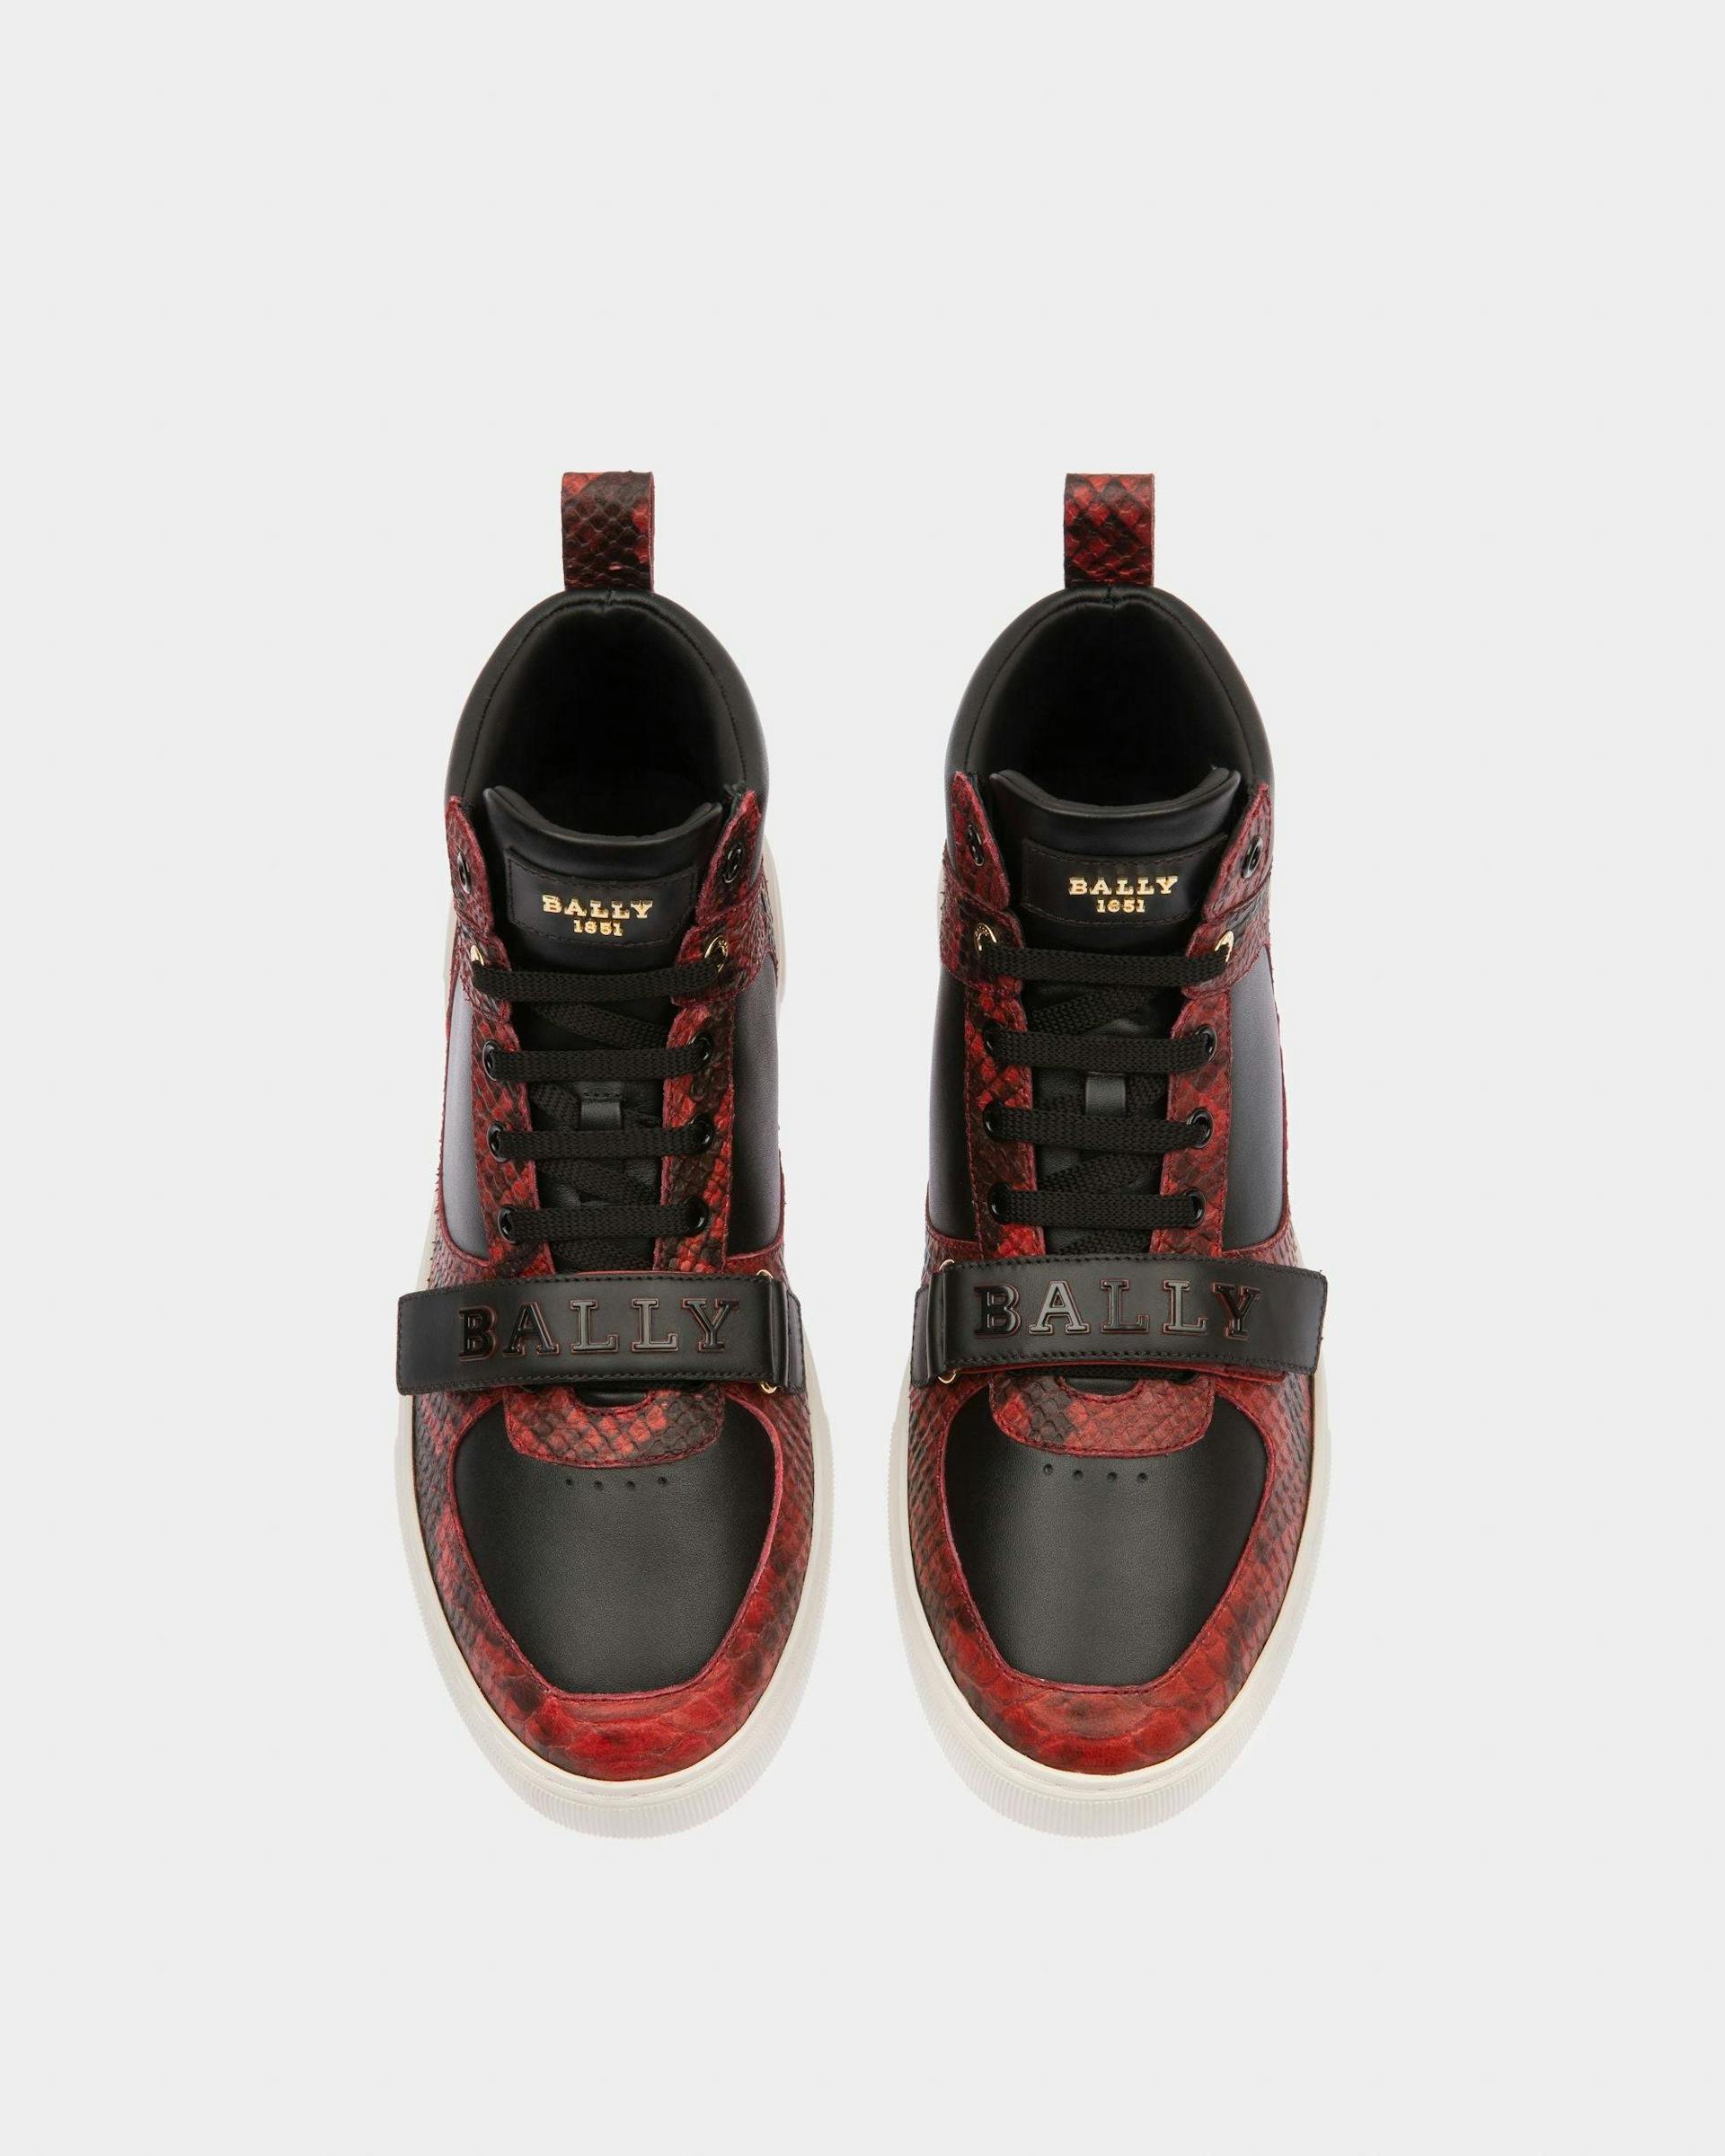 Merryk Leather Sneakers In Bally Red & Black - Men's - Bally - 02